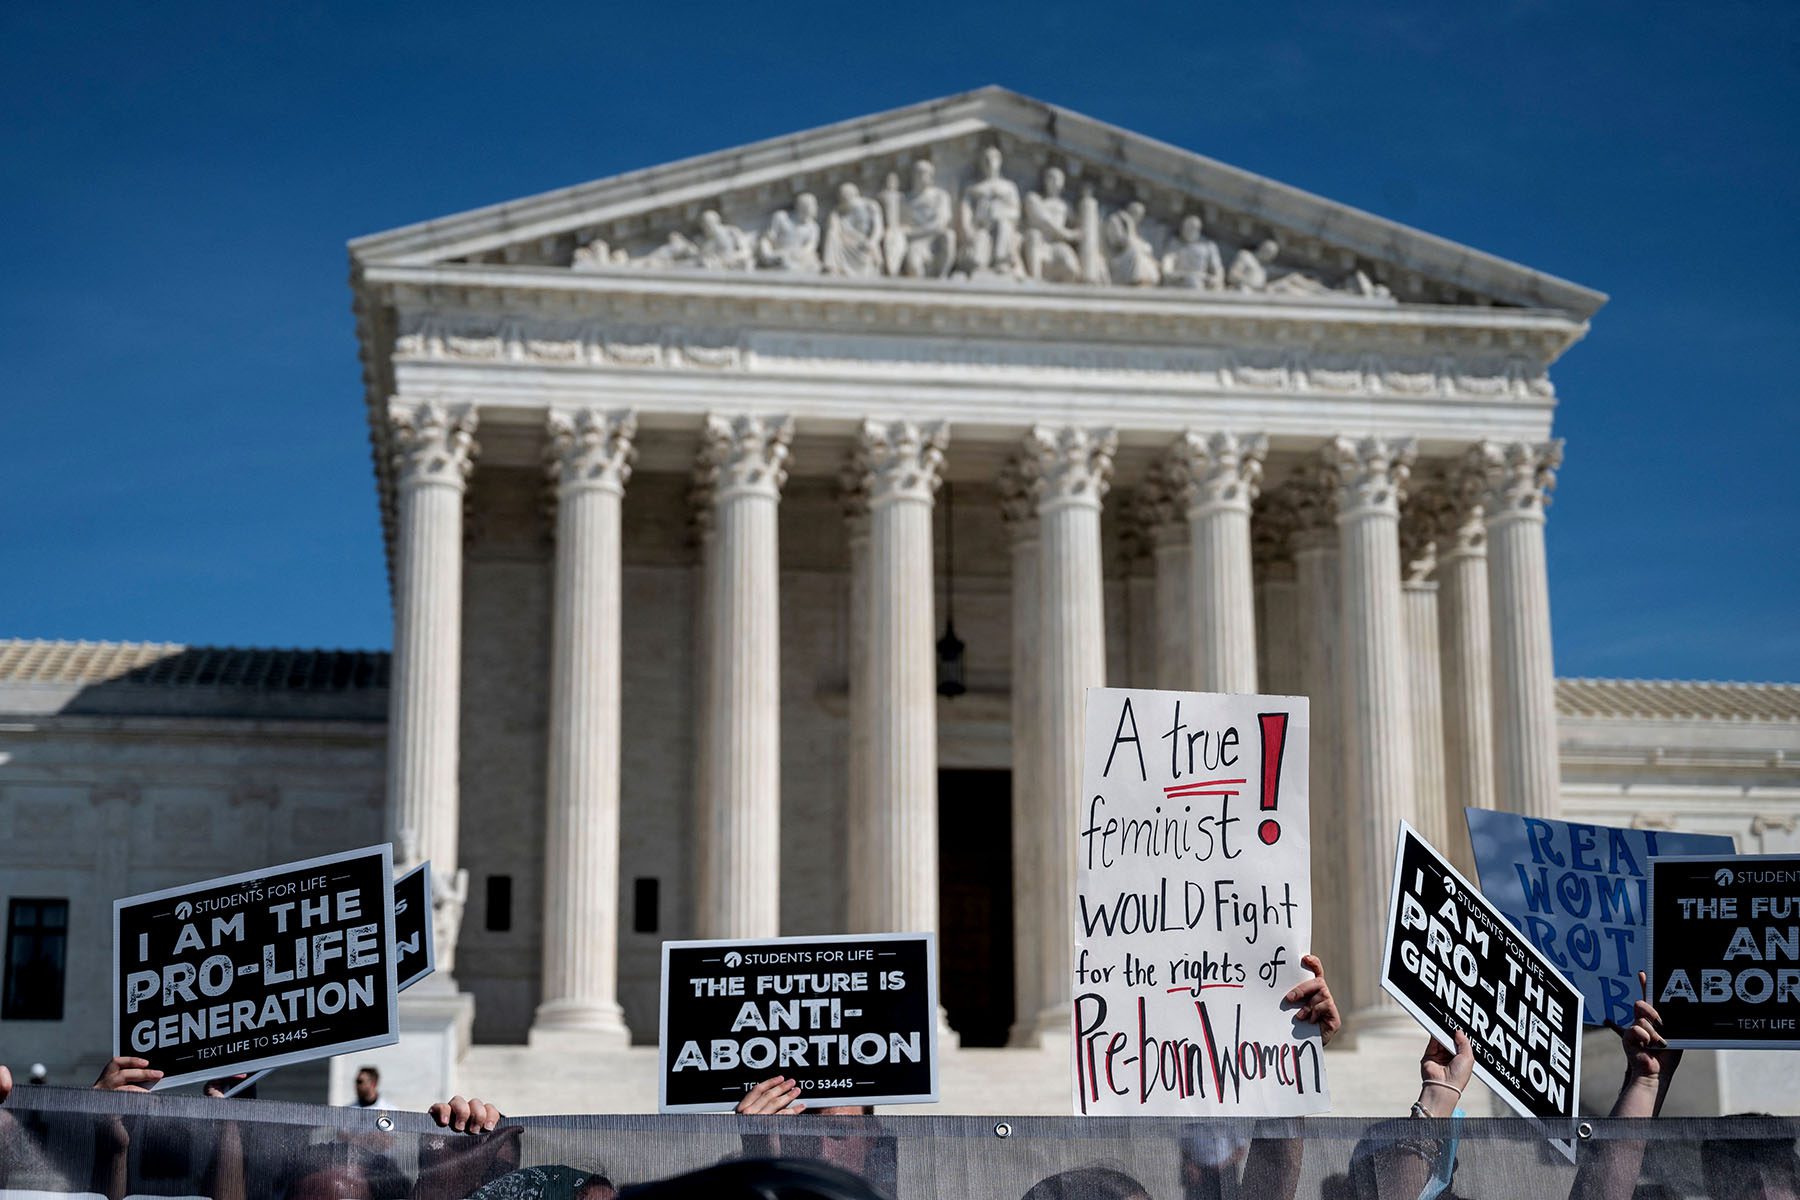 Anti-abortion activists counter-protest the Women's March at the U.S. Supreme court.